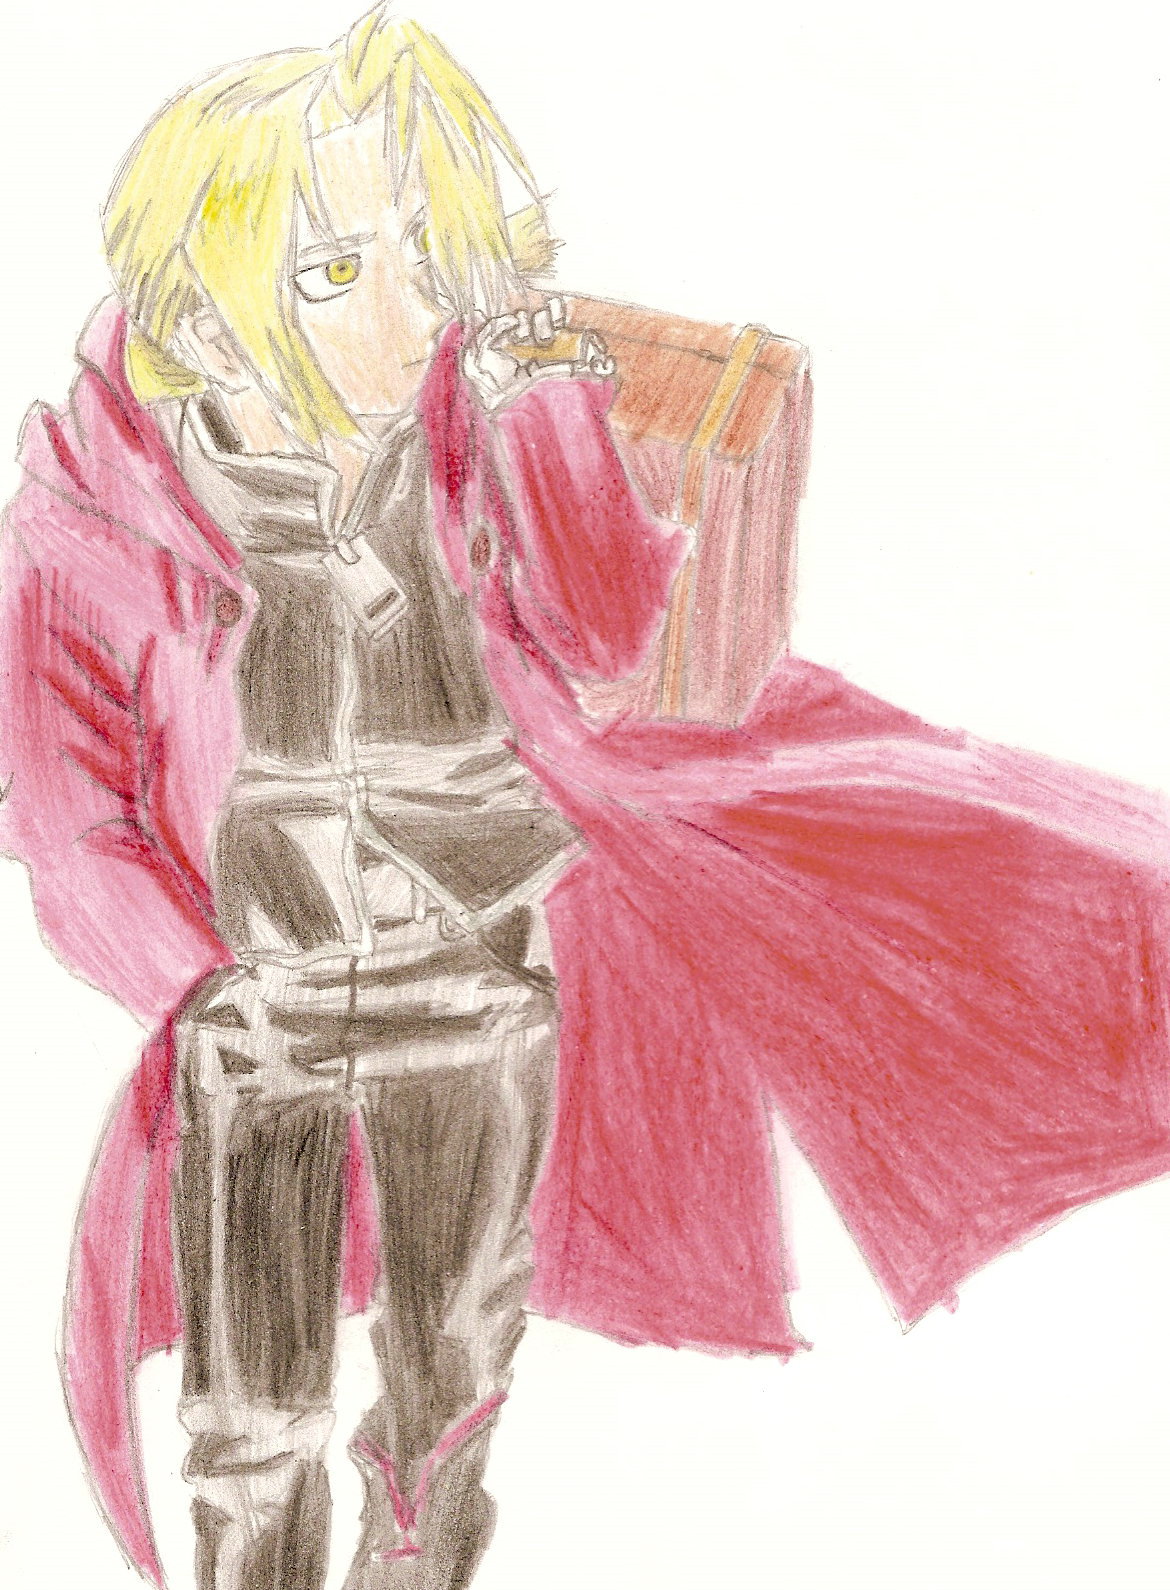 Edward Elric- Moving on by Year_of_the_Horse